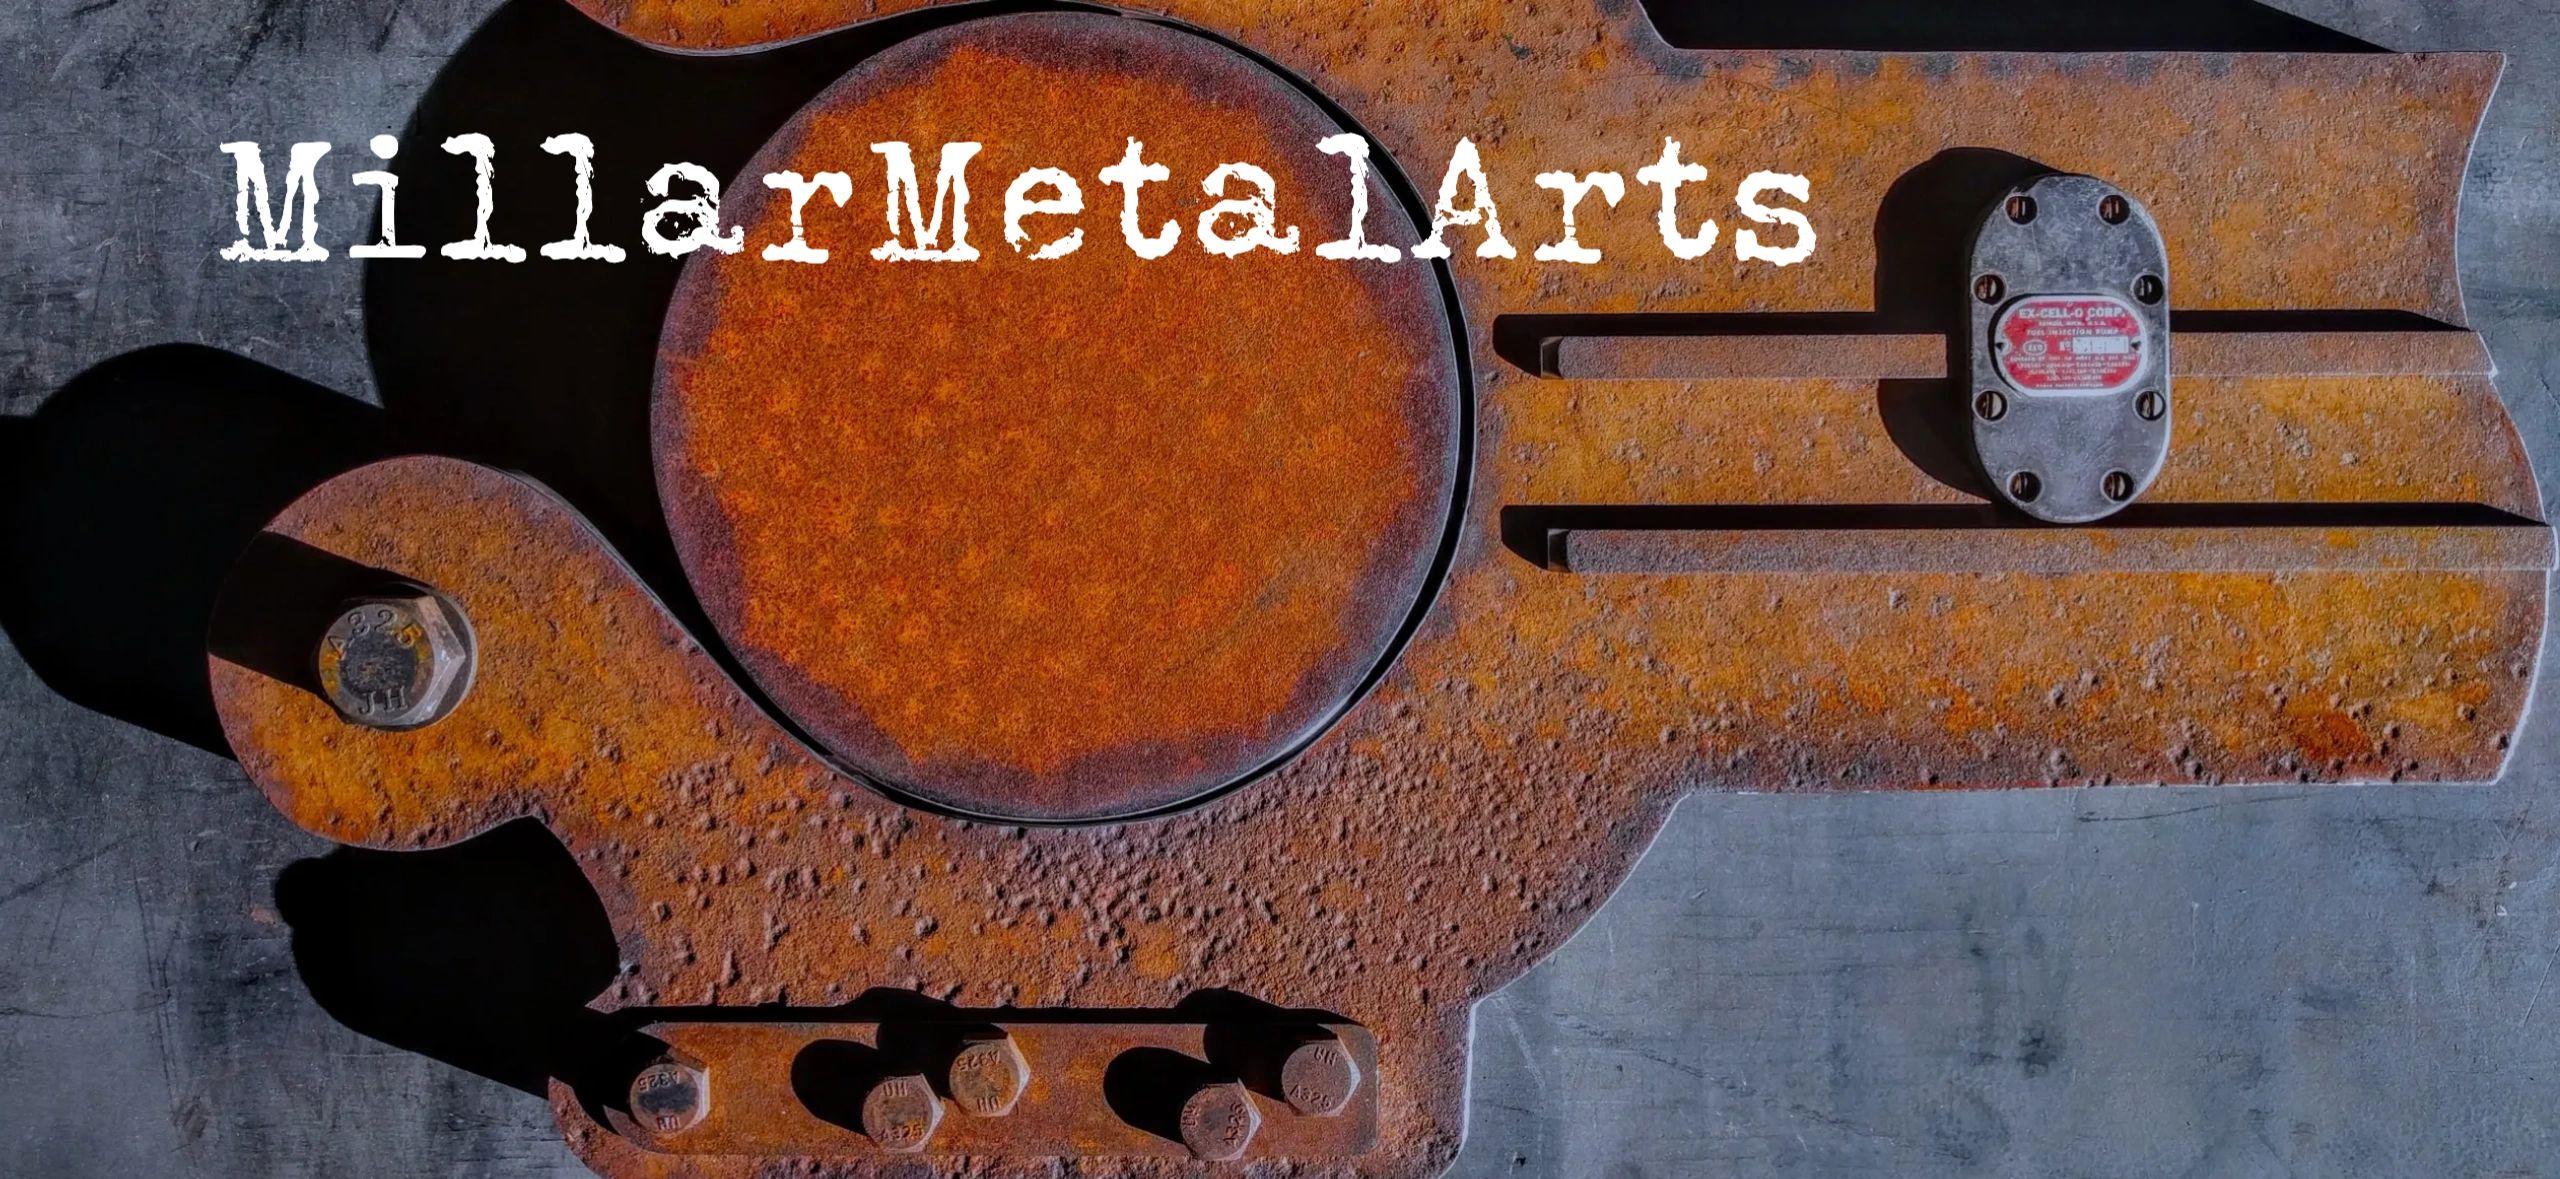 rusty metal art sculpture with upcycled recycled steel and industrial tooling and machine parts